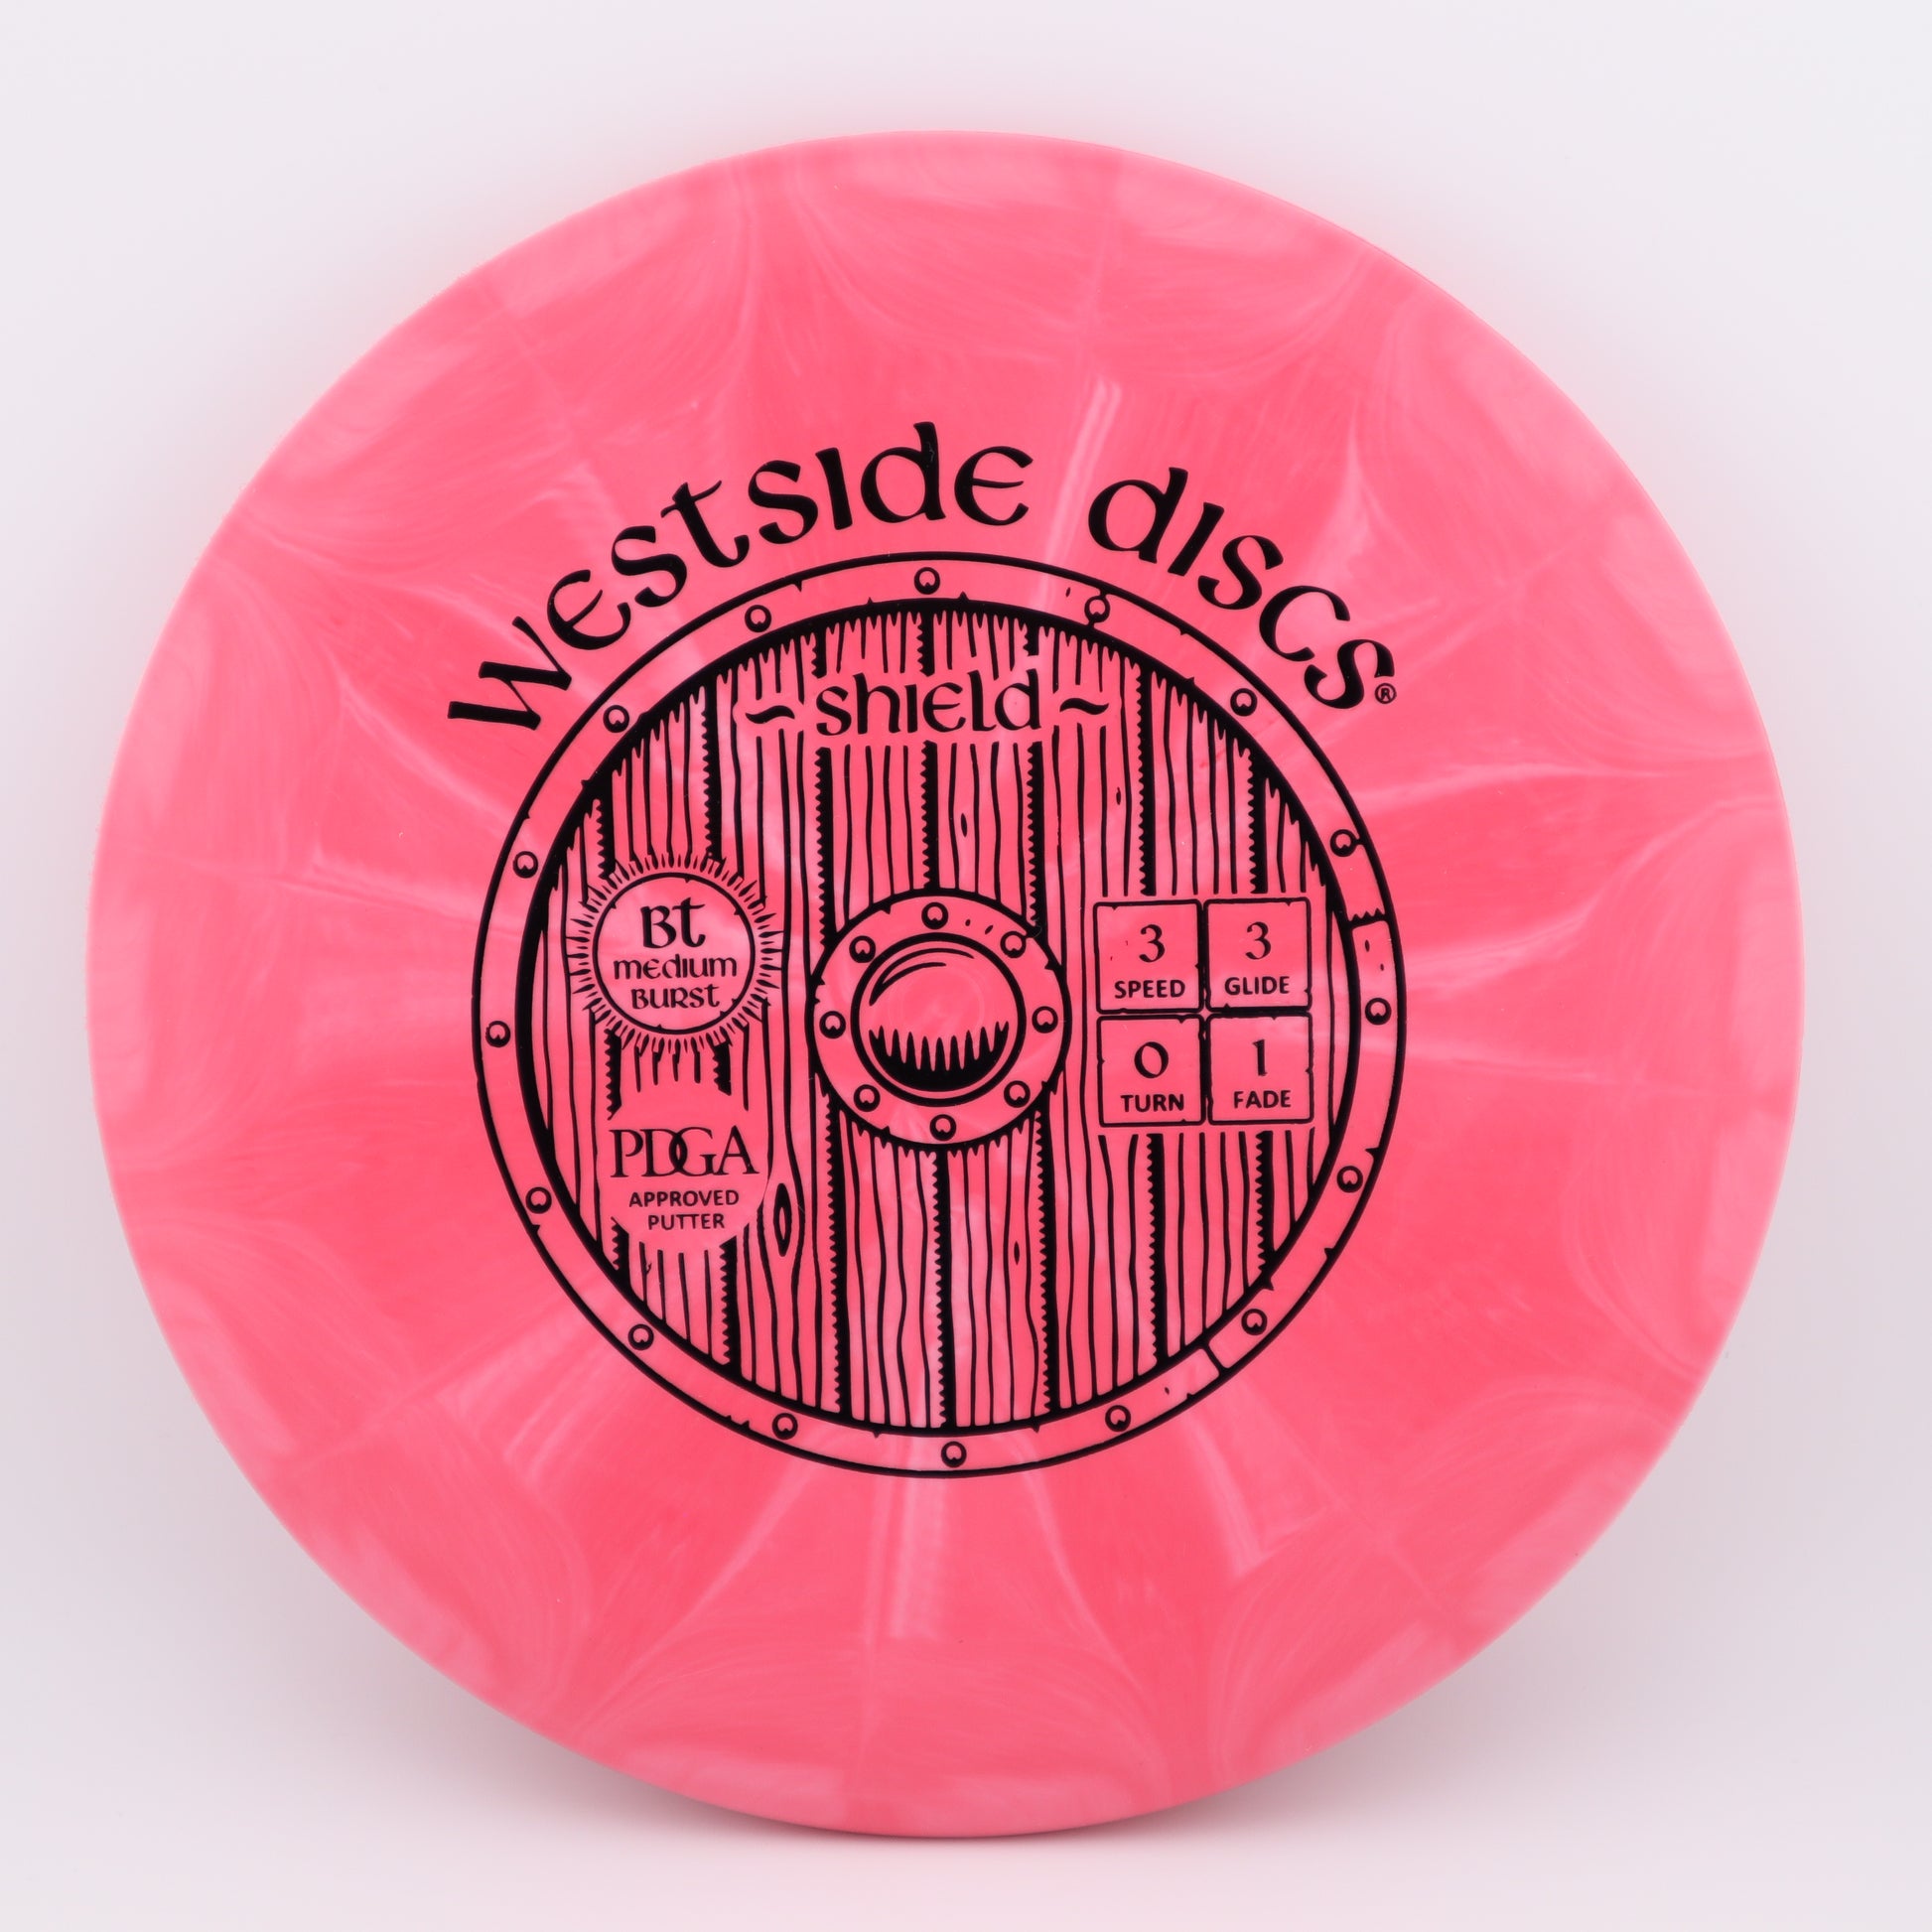 Westside Discs Shield Stable Putt and Approach Disc Golf